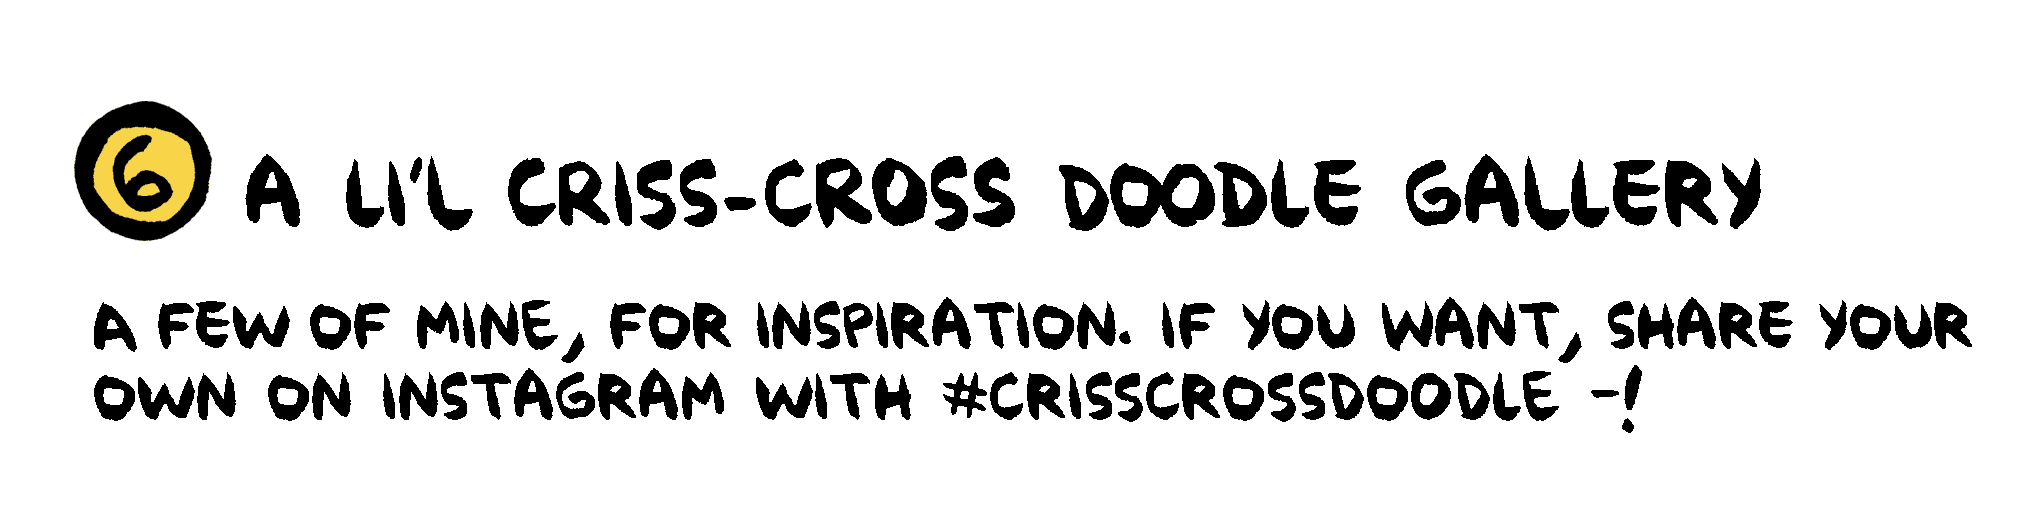 6. A little criss-cross doodle gallery. A few of mine, for inspiration. If you want, share your own on instagram with #crisscrossdoodle -!